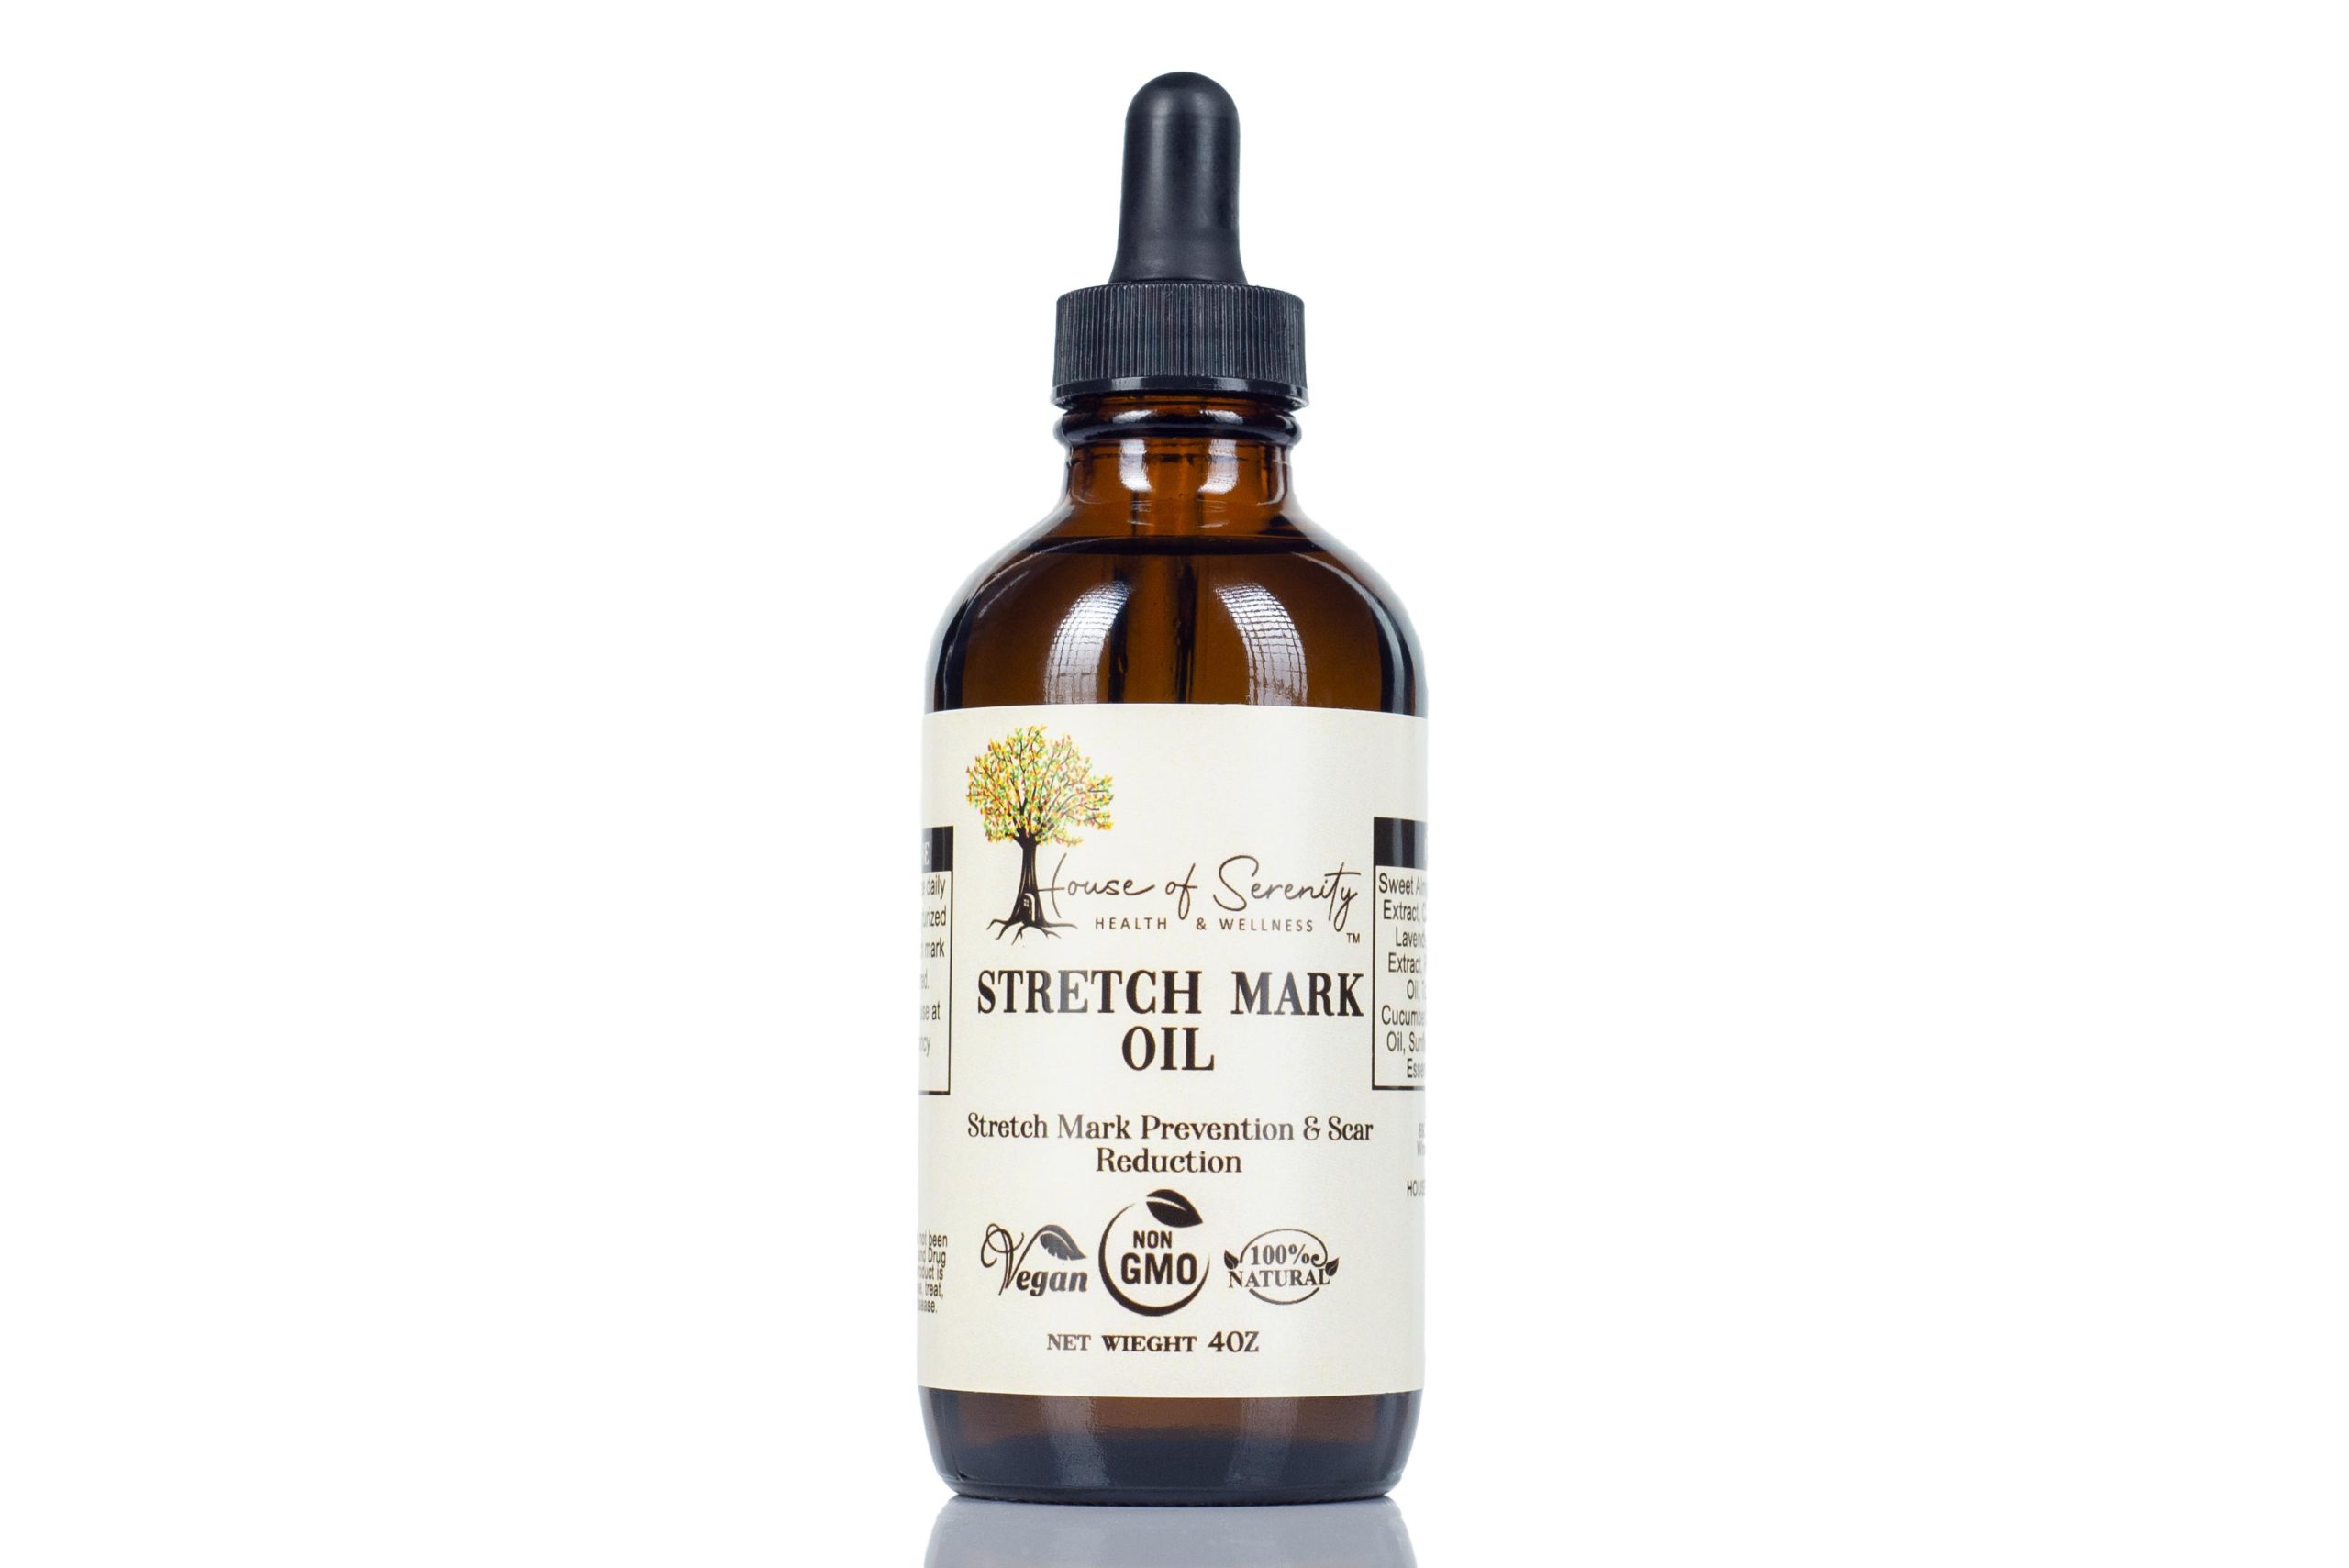 Stretch mark Oil by House of Serenity Health and Wellness